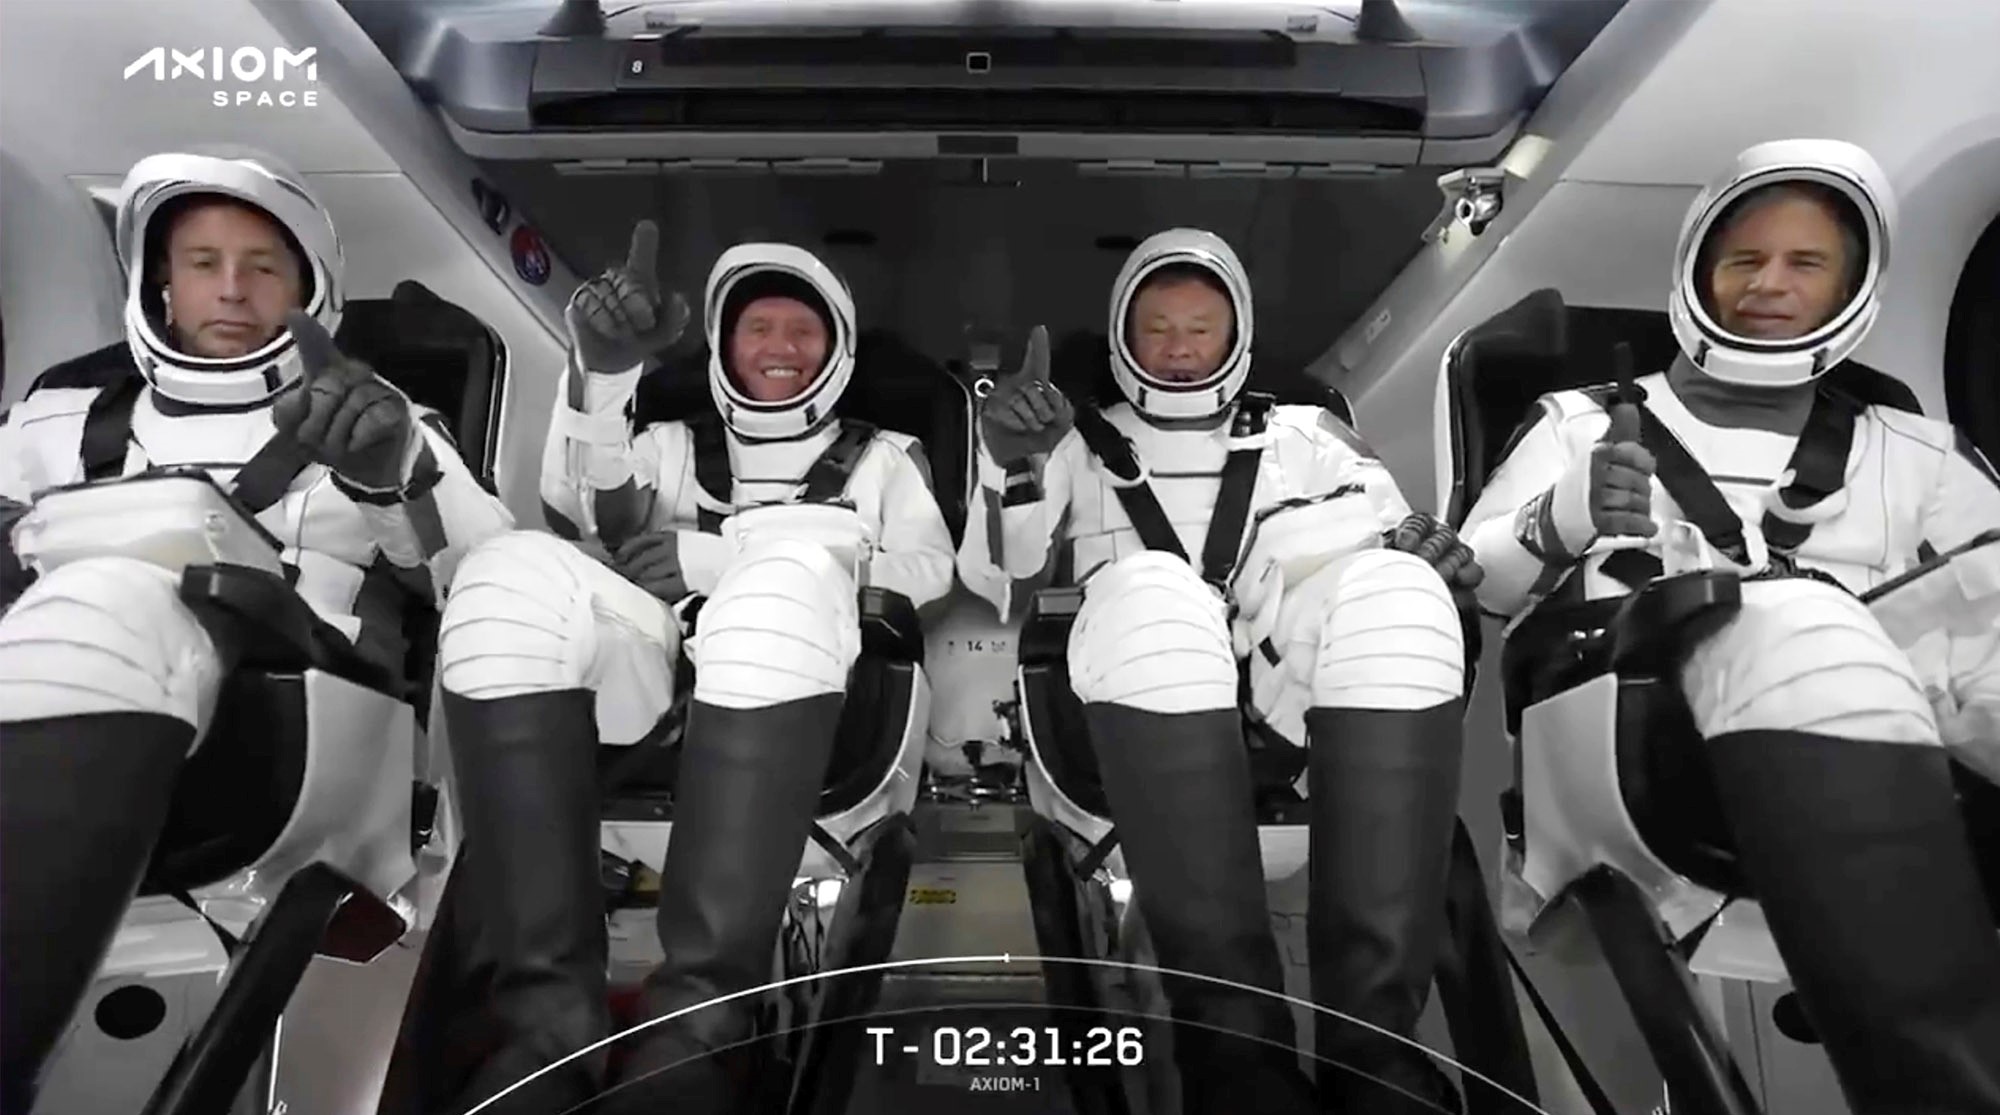 The SpaceX capsule docks at ISS with an all-private astronaut crew